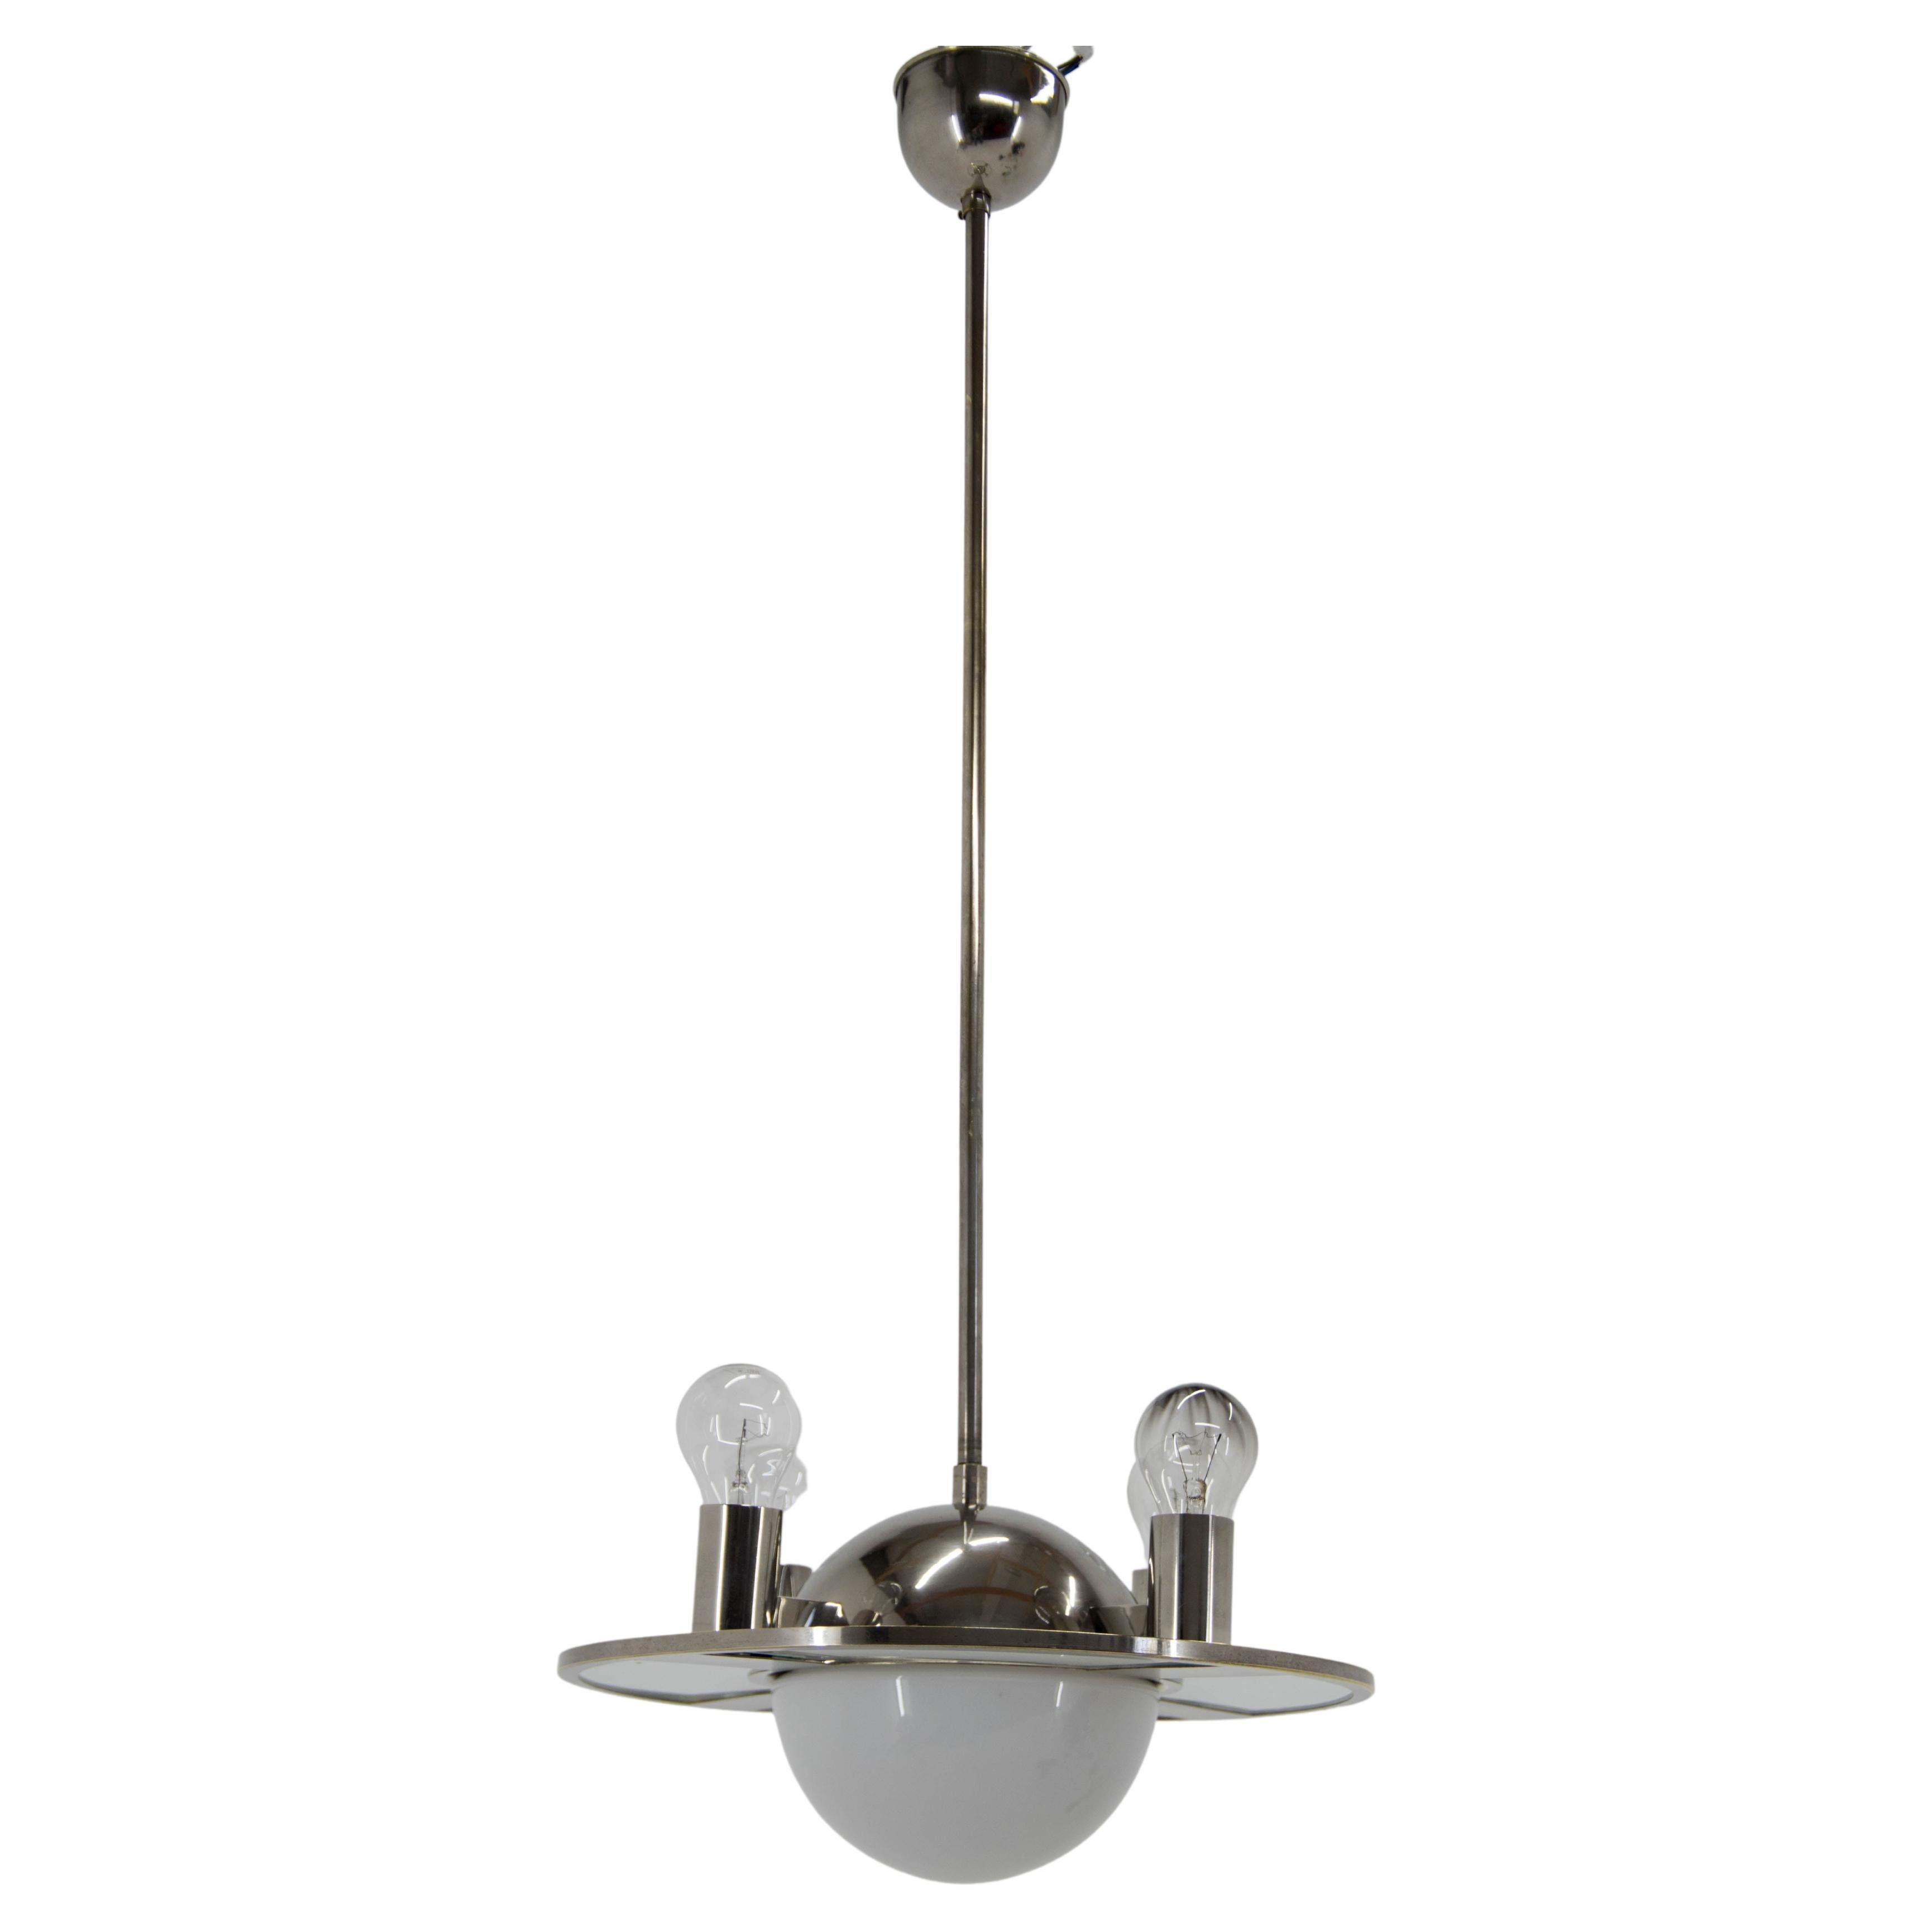 Unique Bauhaus or Functionalist chandelier from 1920s made of nickel, sand blasted glass and opaline glass. A rare and eye-catching piece!
Restored, polished, rewired - two separate circuits 3+1x40W, E25-E27 bulbs.
Central rod can be shortened on